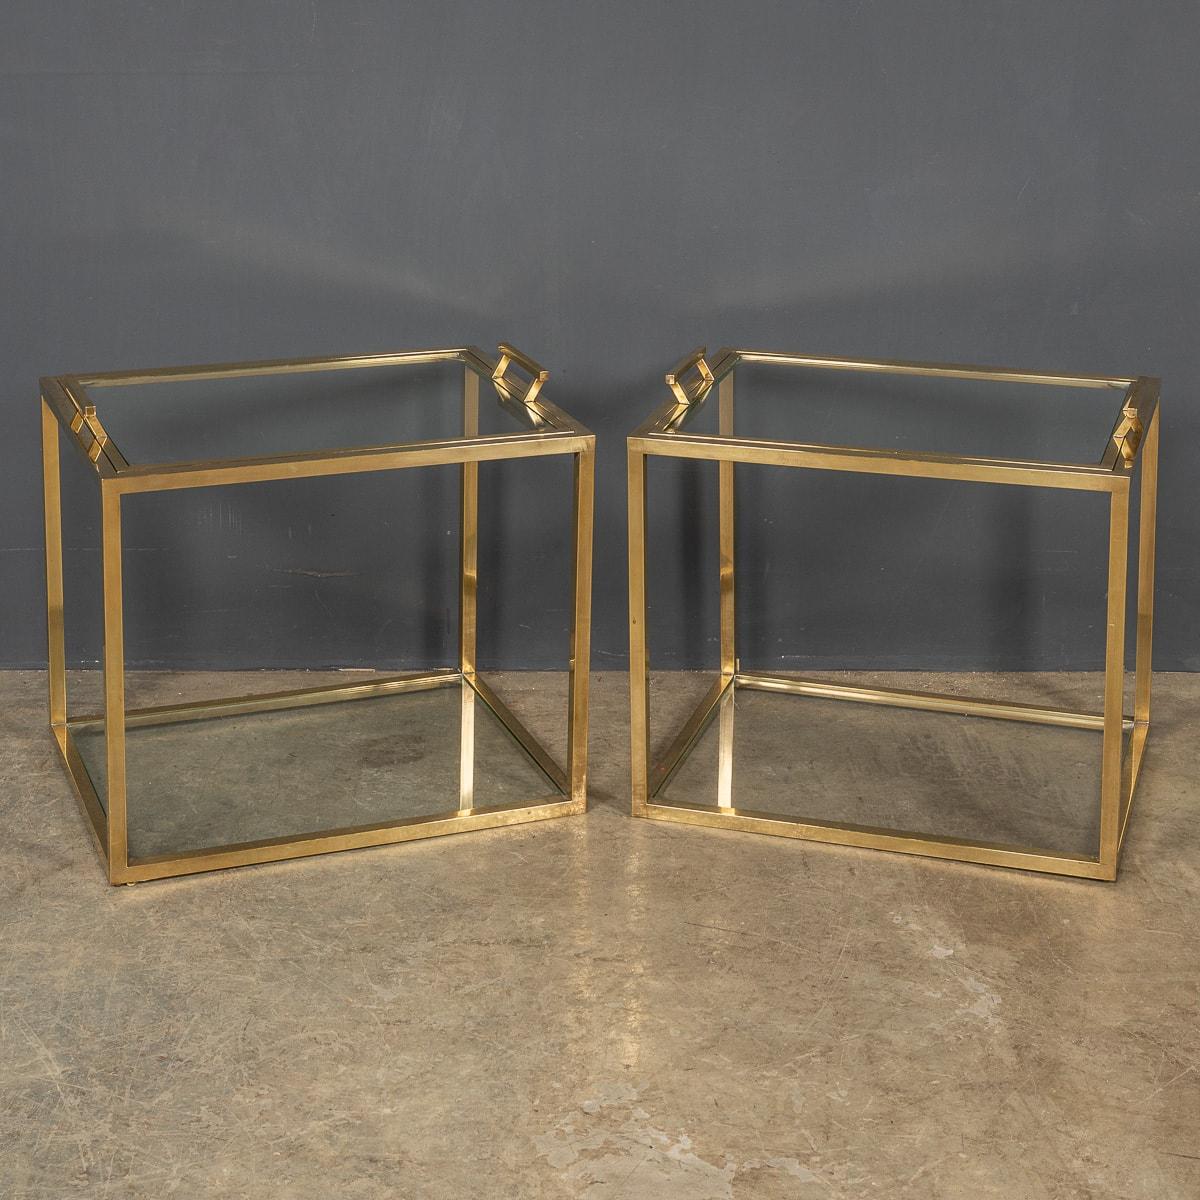 A lovely set of Italian made brass side tables, with removable tray tops. They present a perfect space-saving solution whilst doubling up as useful occasional tables and/or side-tables.

CONDITION
In Good Condition - Good original vintage